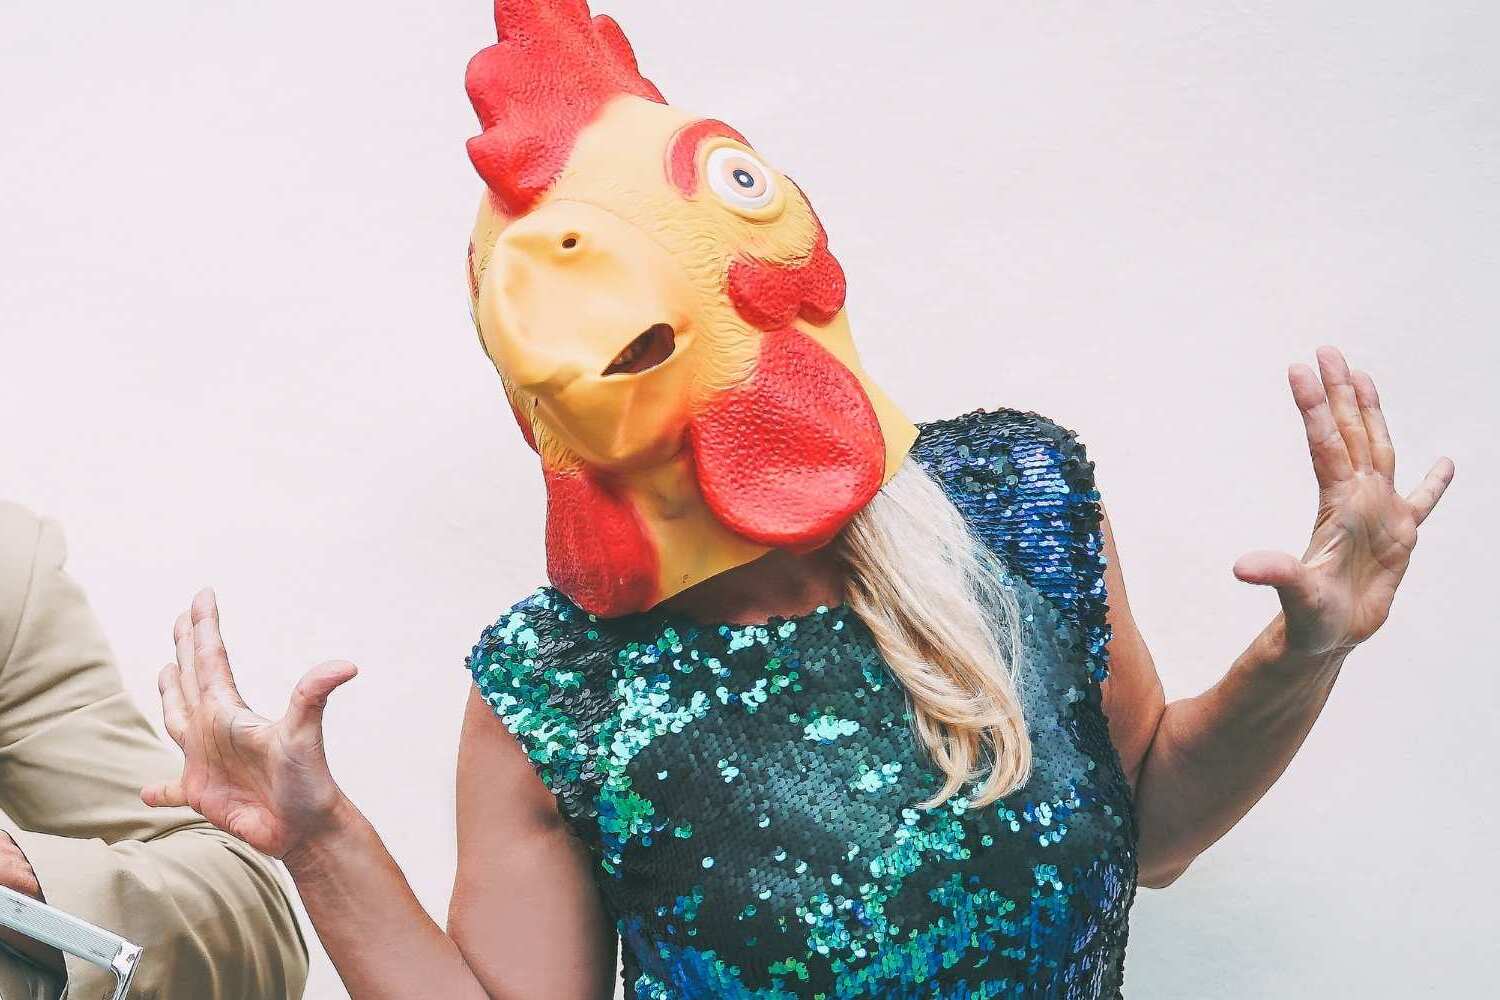 14-facts-about-national-dance-like-a-chicken-day-may-14th